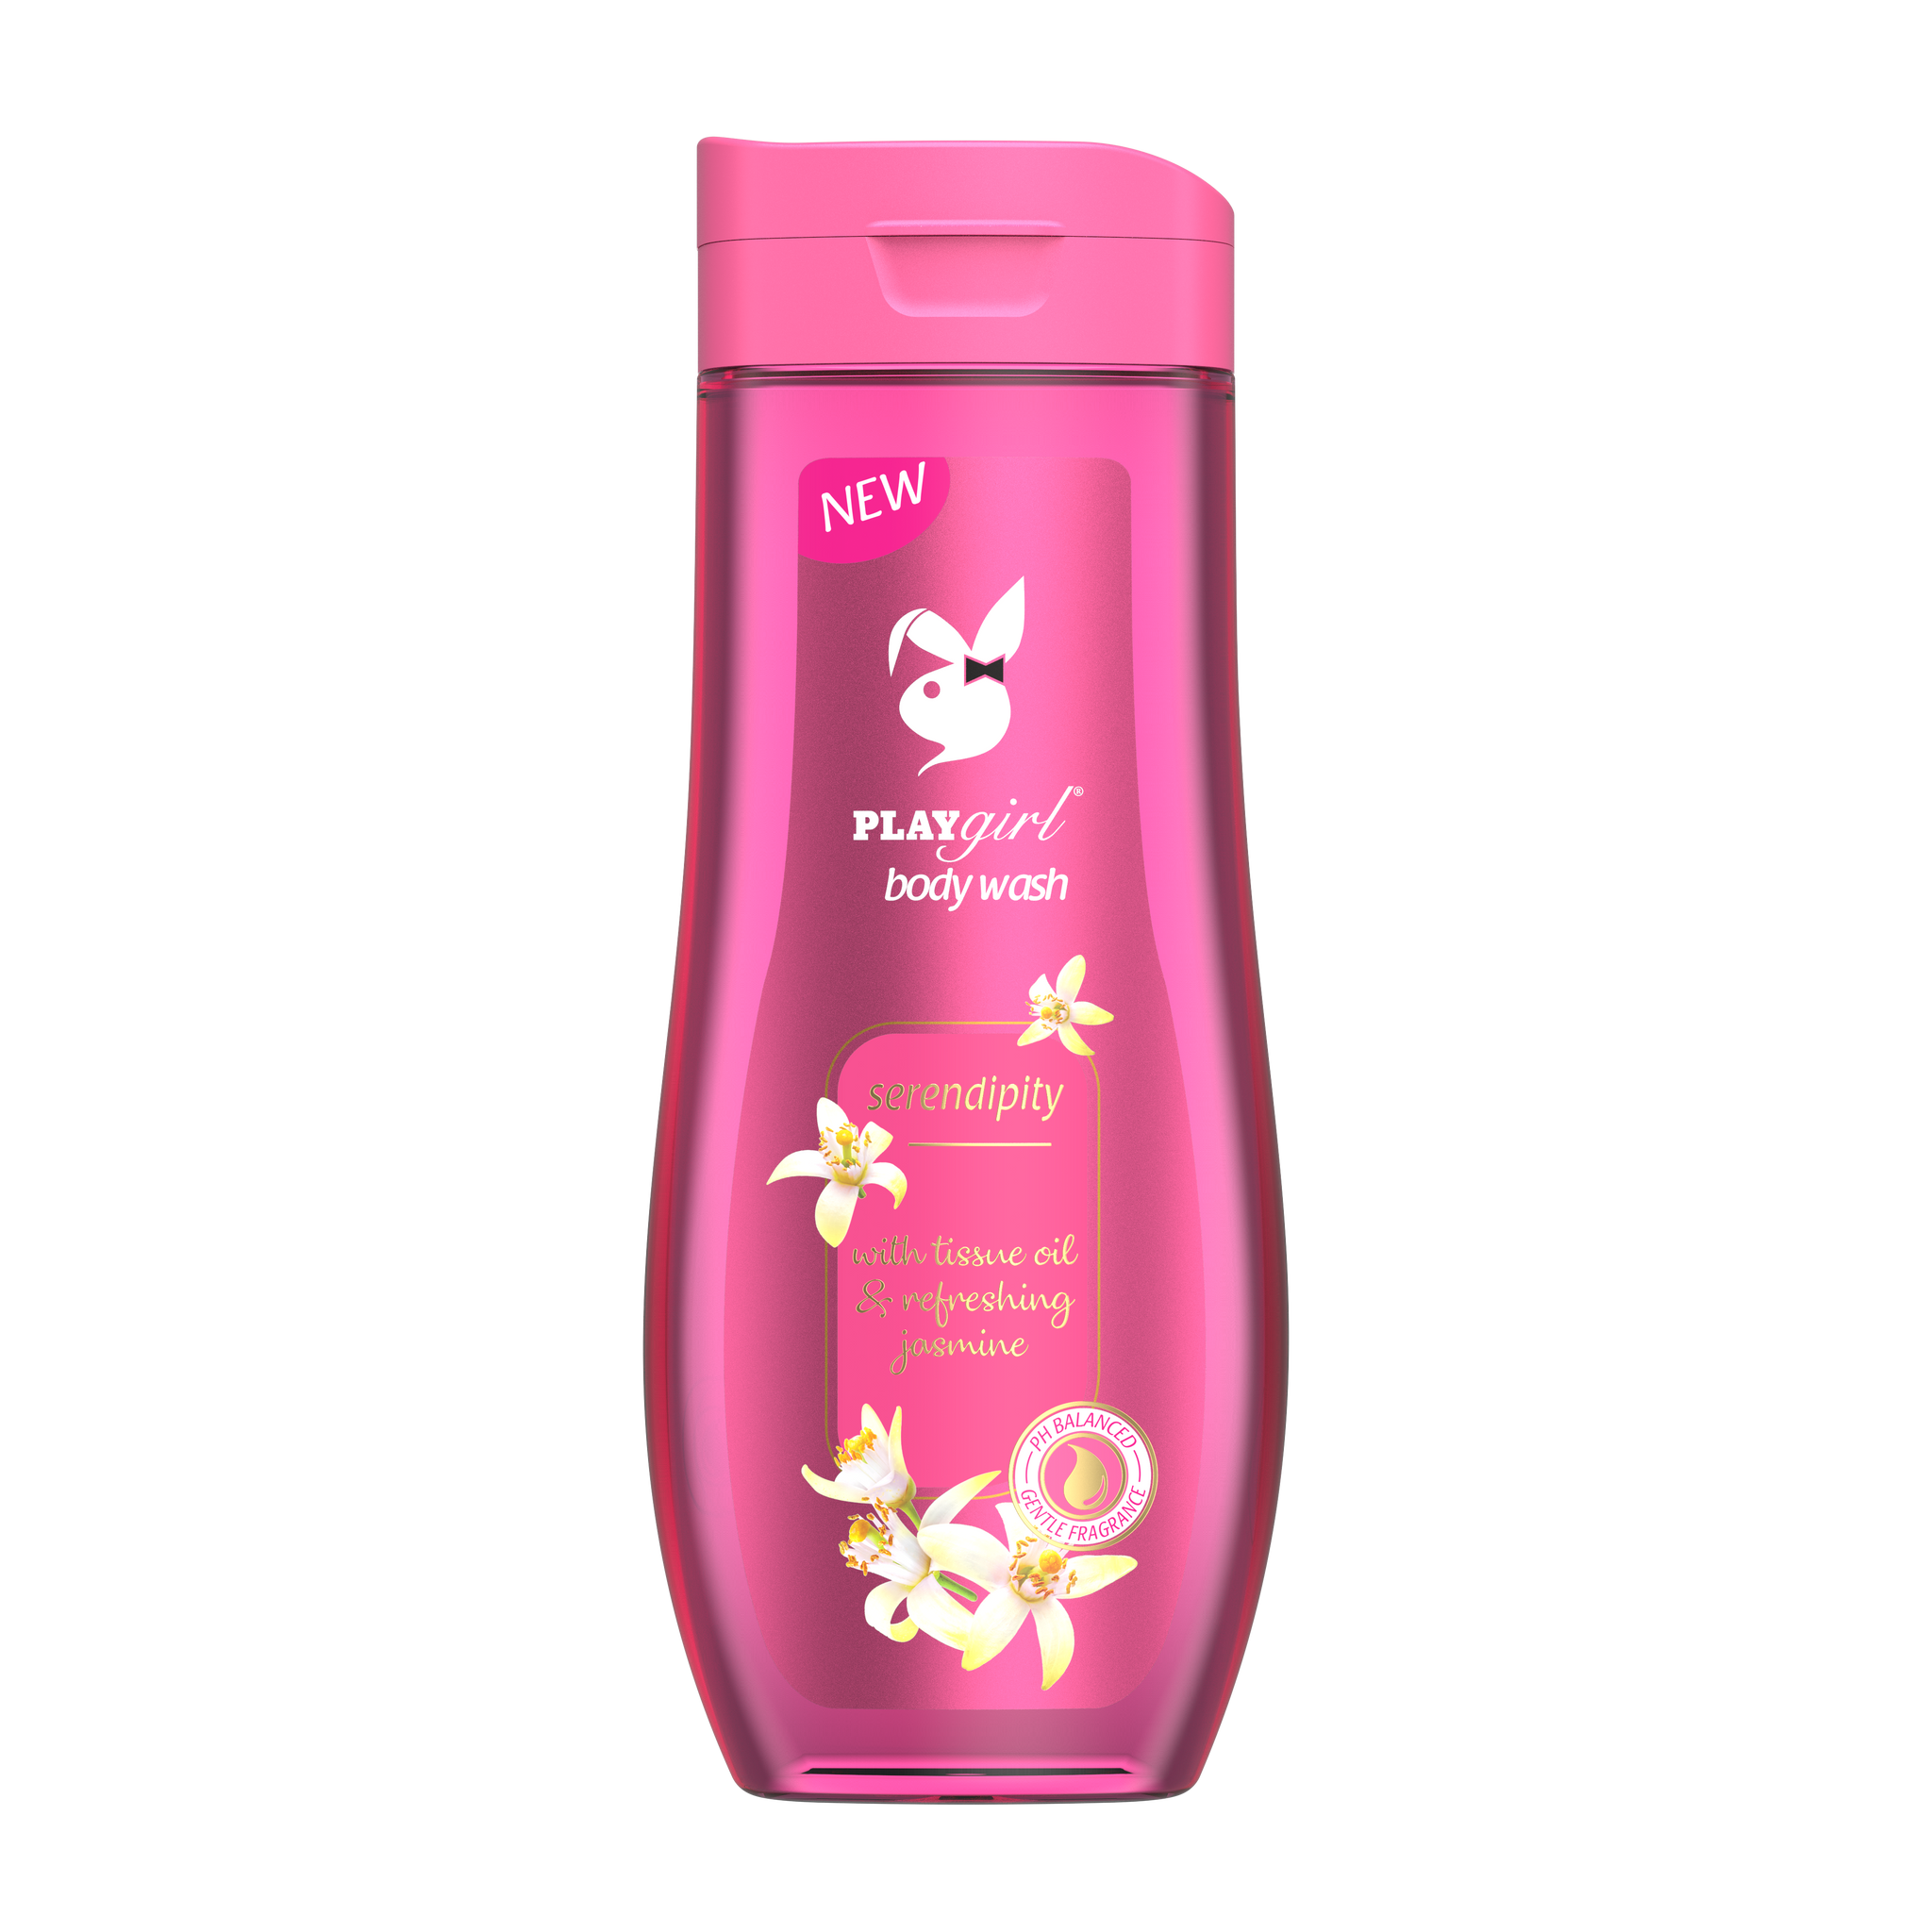 Playgirl Serendipity Body Wash - 400ml - 24 Pack